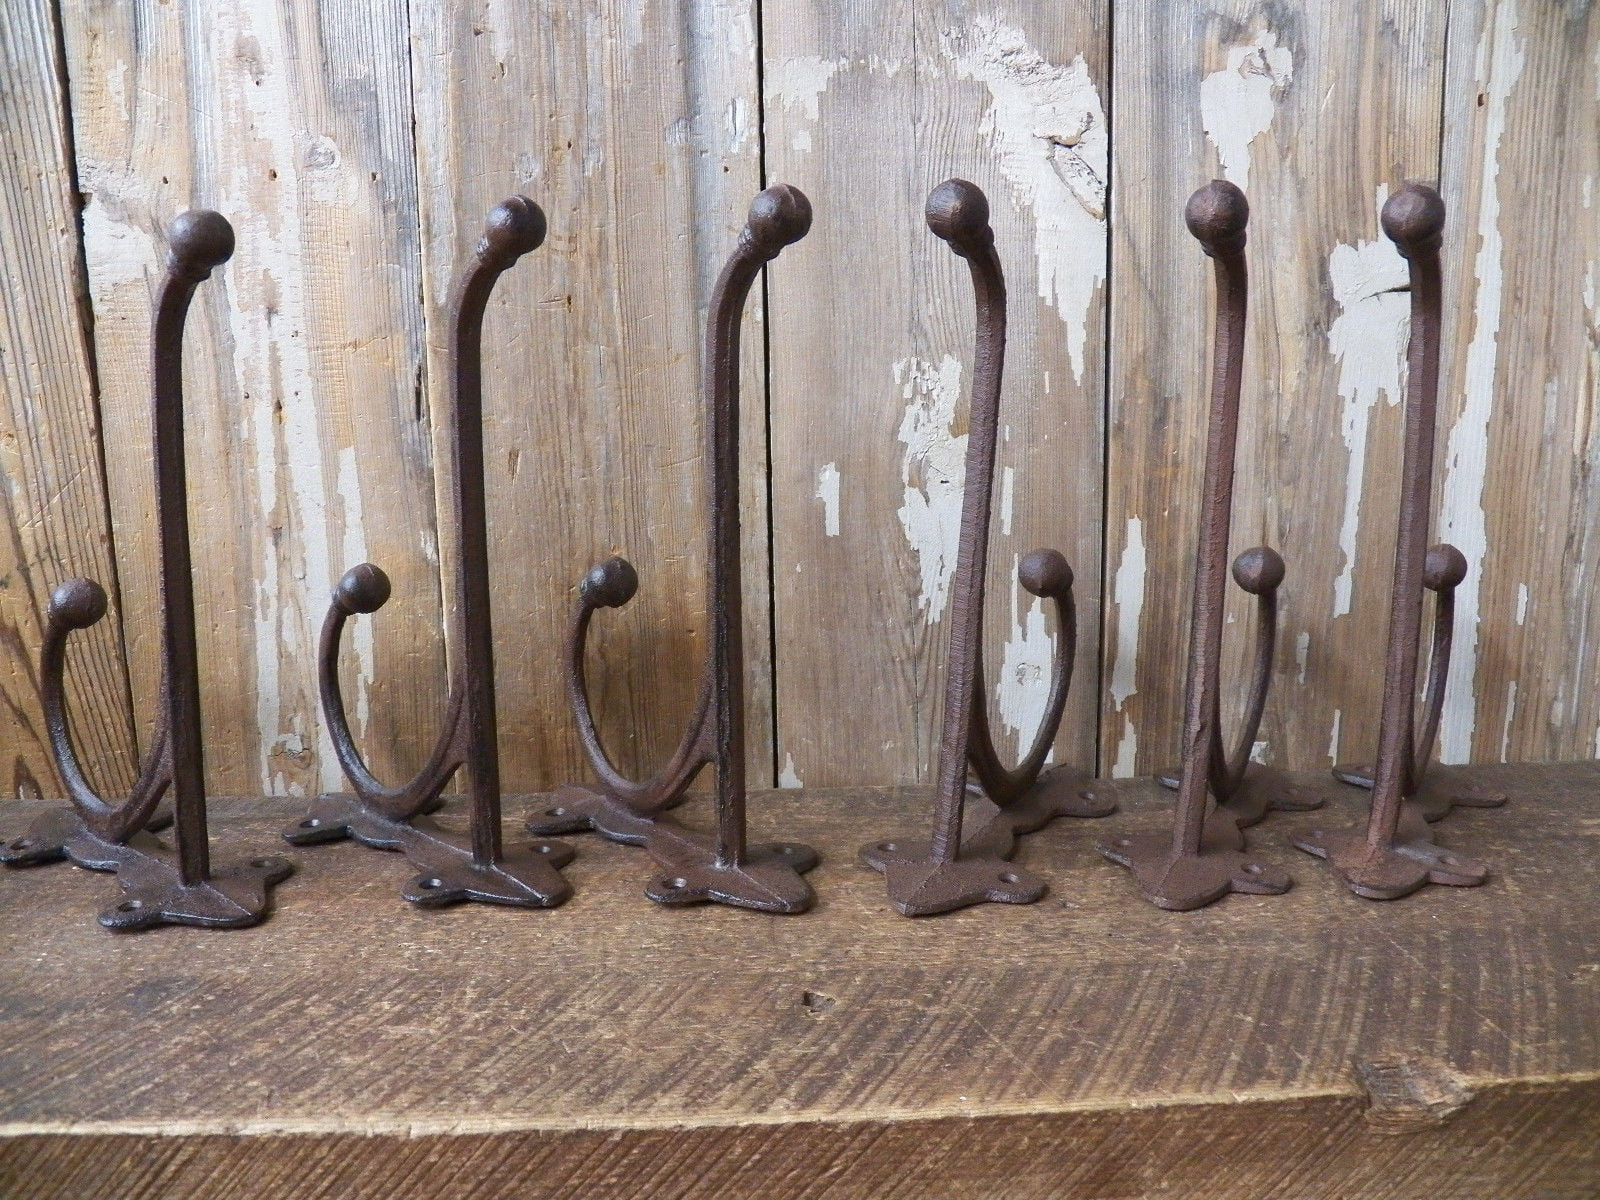 6 LG BROWN 9.25" ANTIQUE-STYLE HARNESS WALL HOOKS CAST IRON rustic barn outdoor 